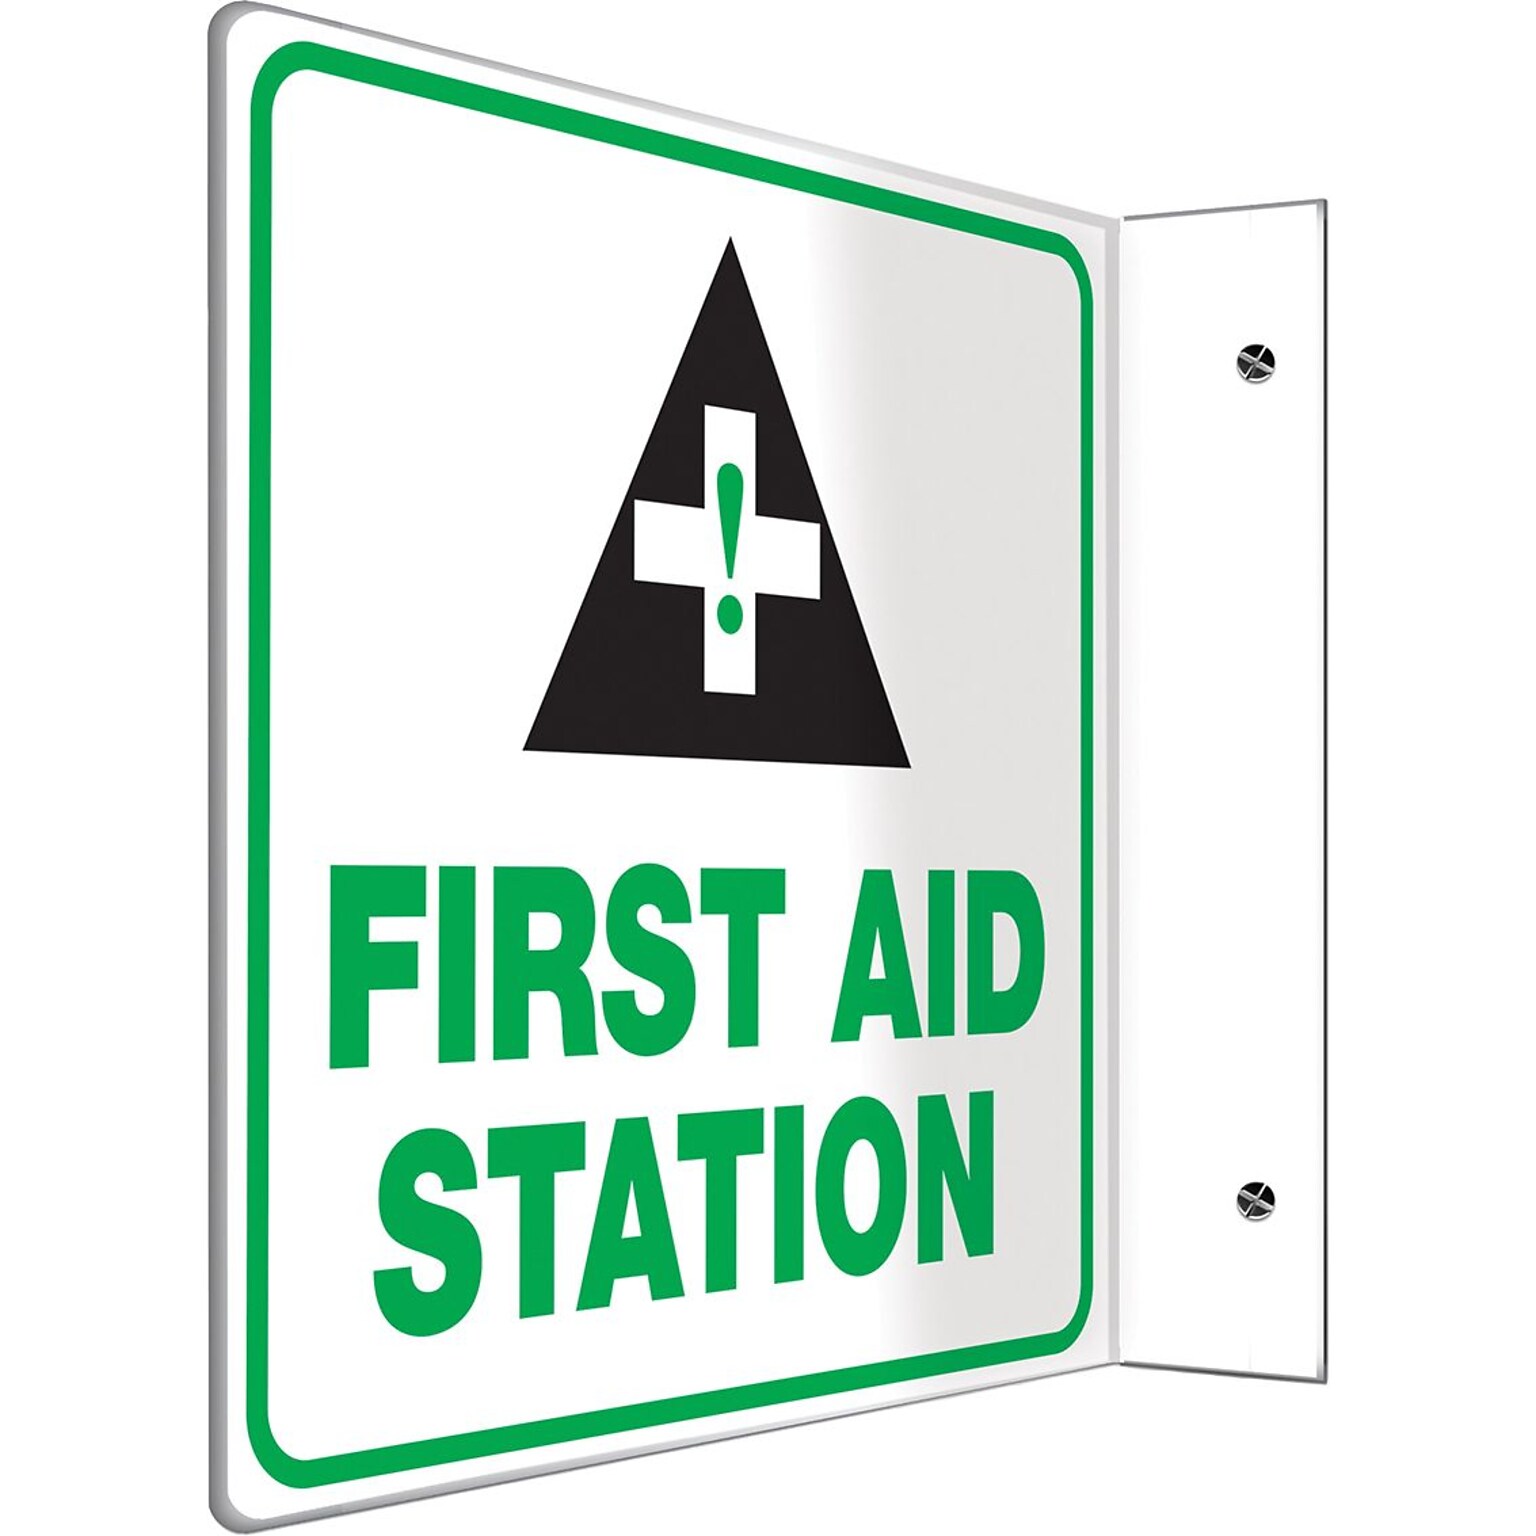 Accuform First Aid Station Projection Sign, Green/Black/White, 8H x 8W (PSP723)